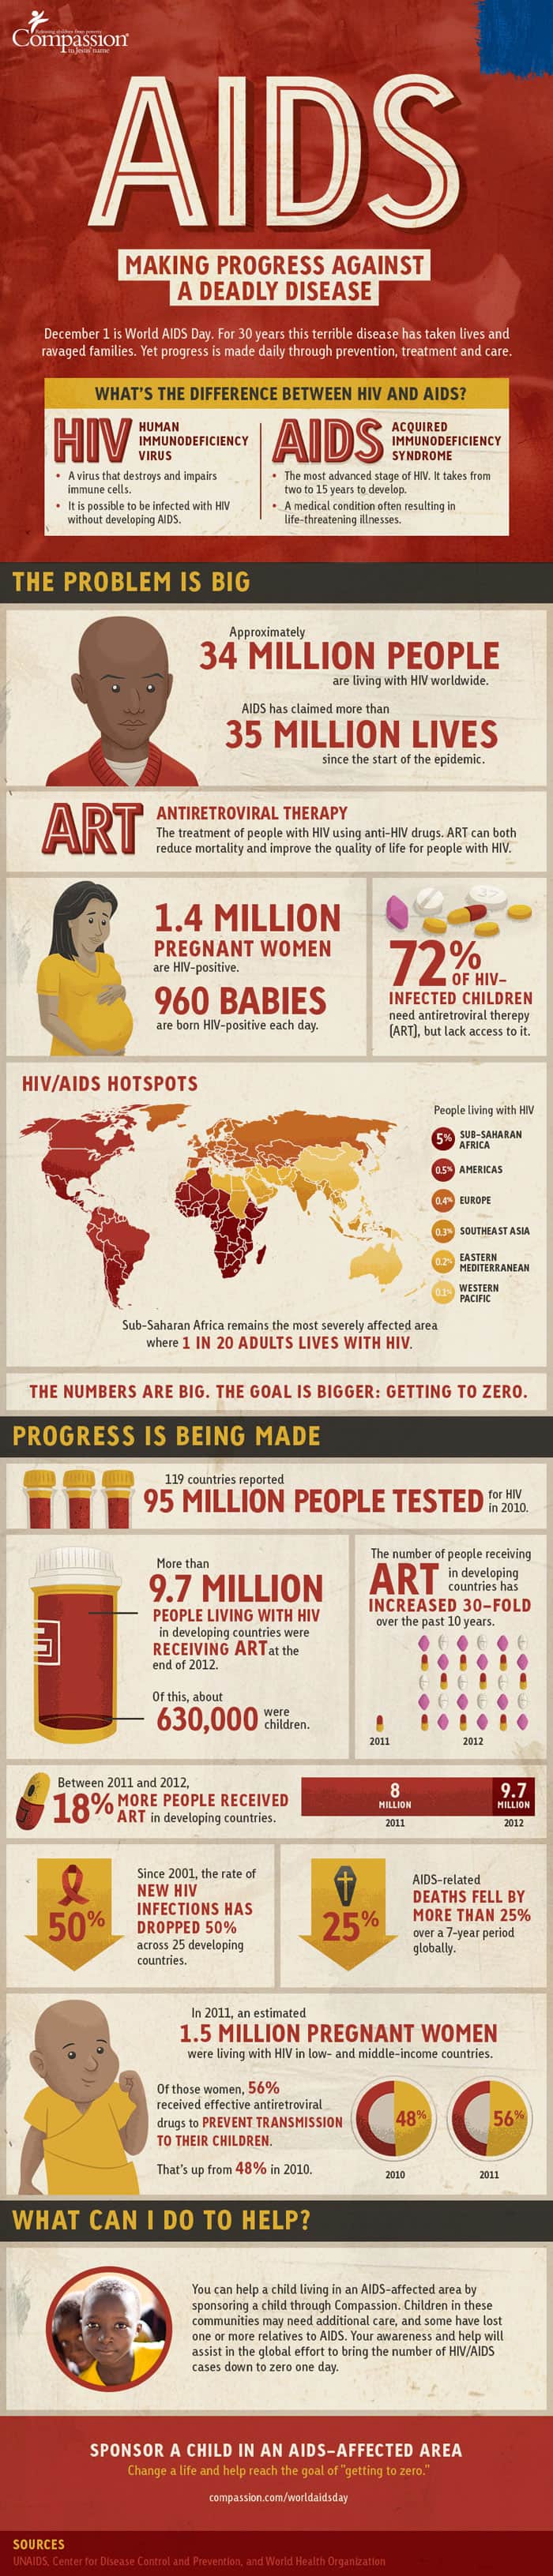 world aids day 2013 infographic